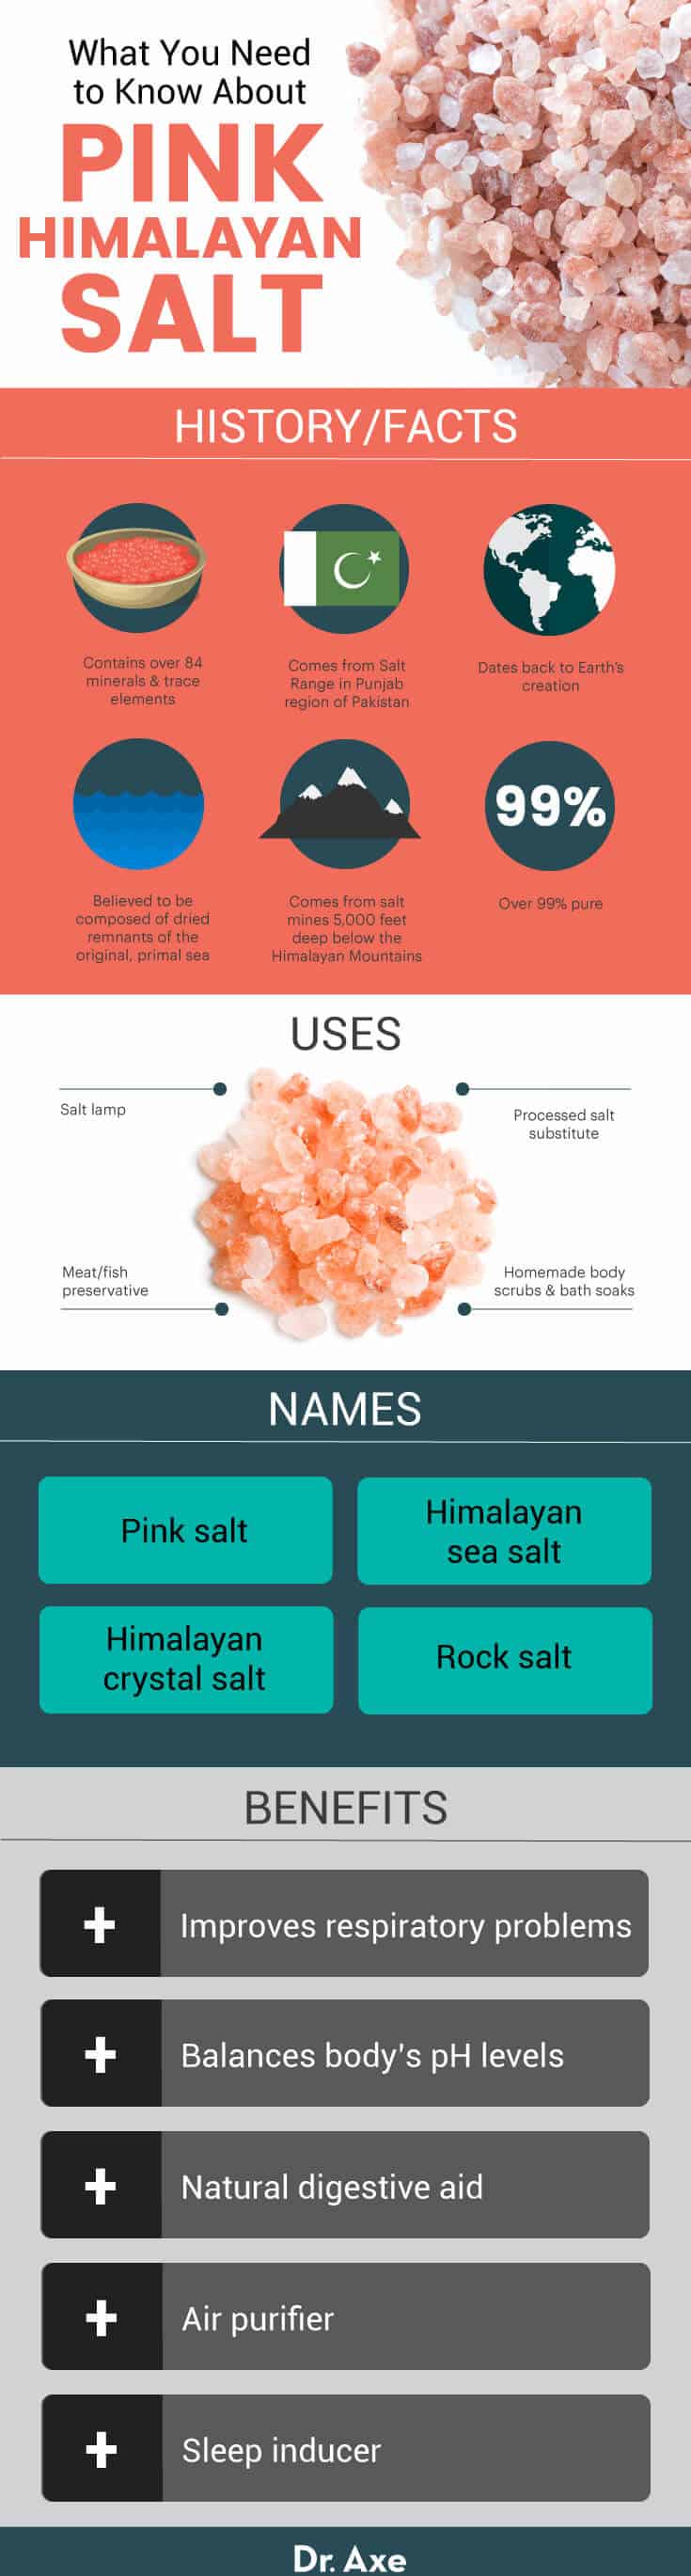 What is pink Himalayan salt? - Dr. Axe